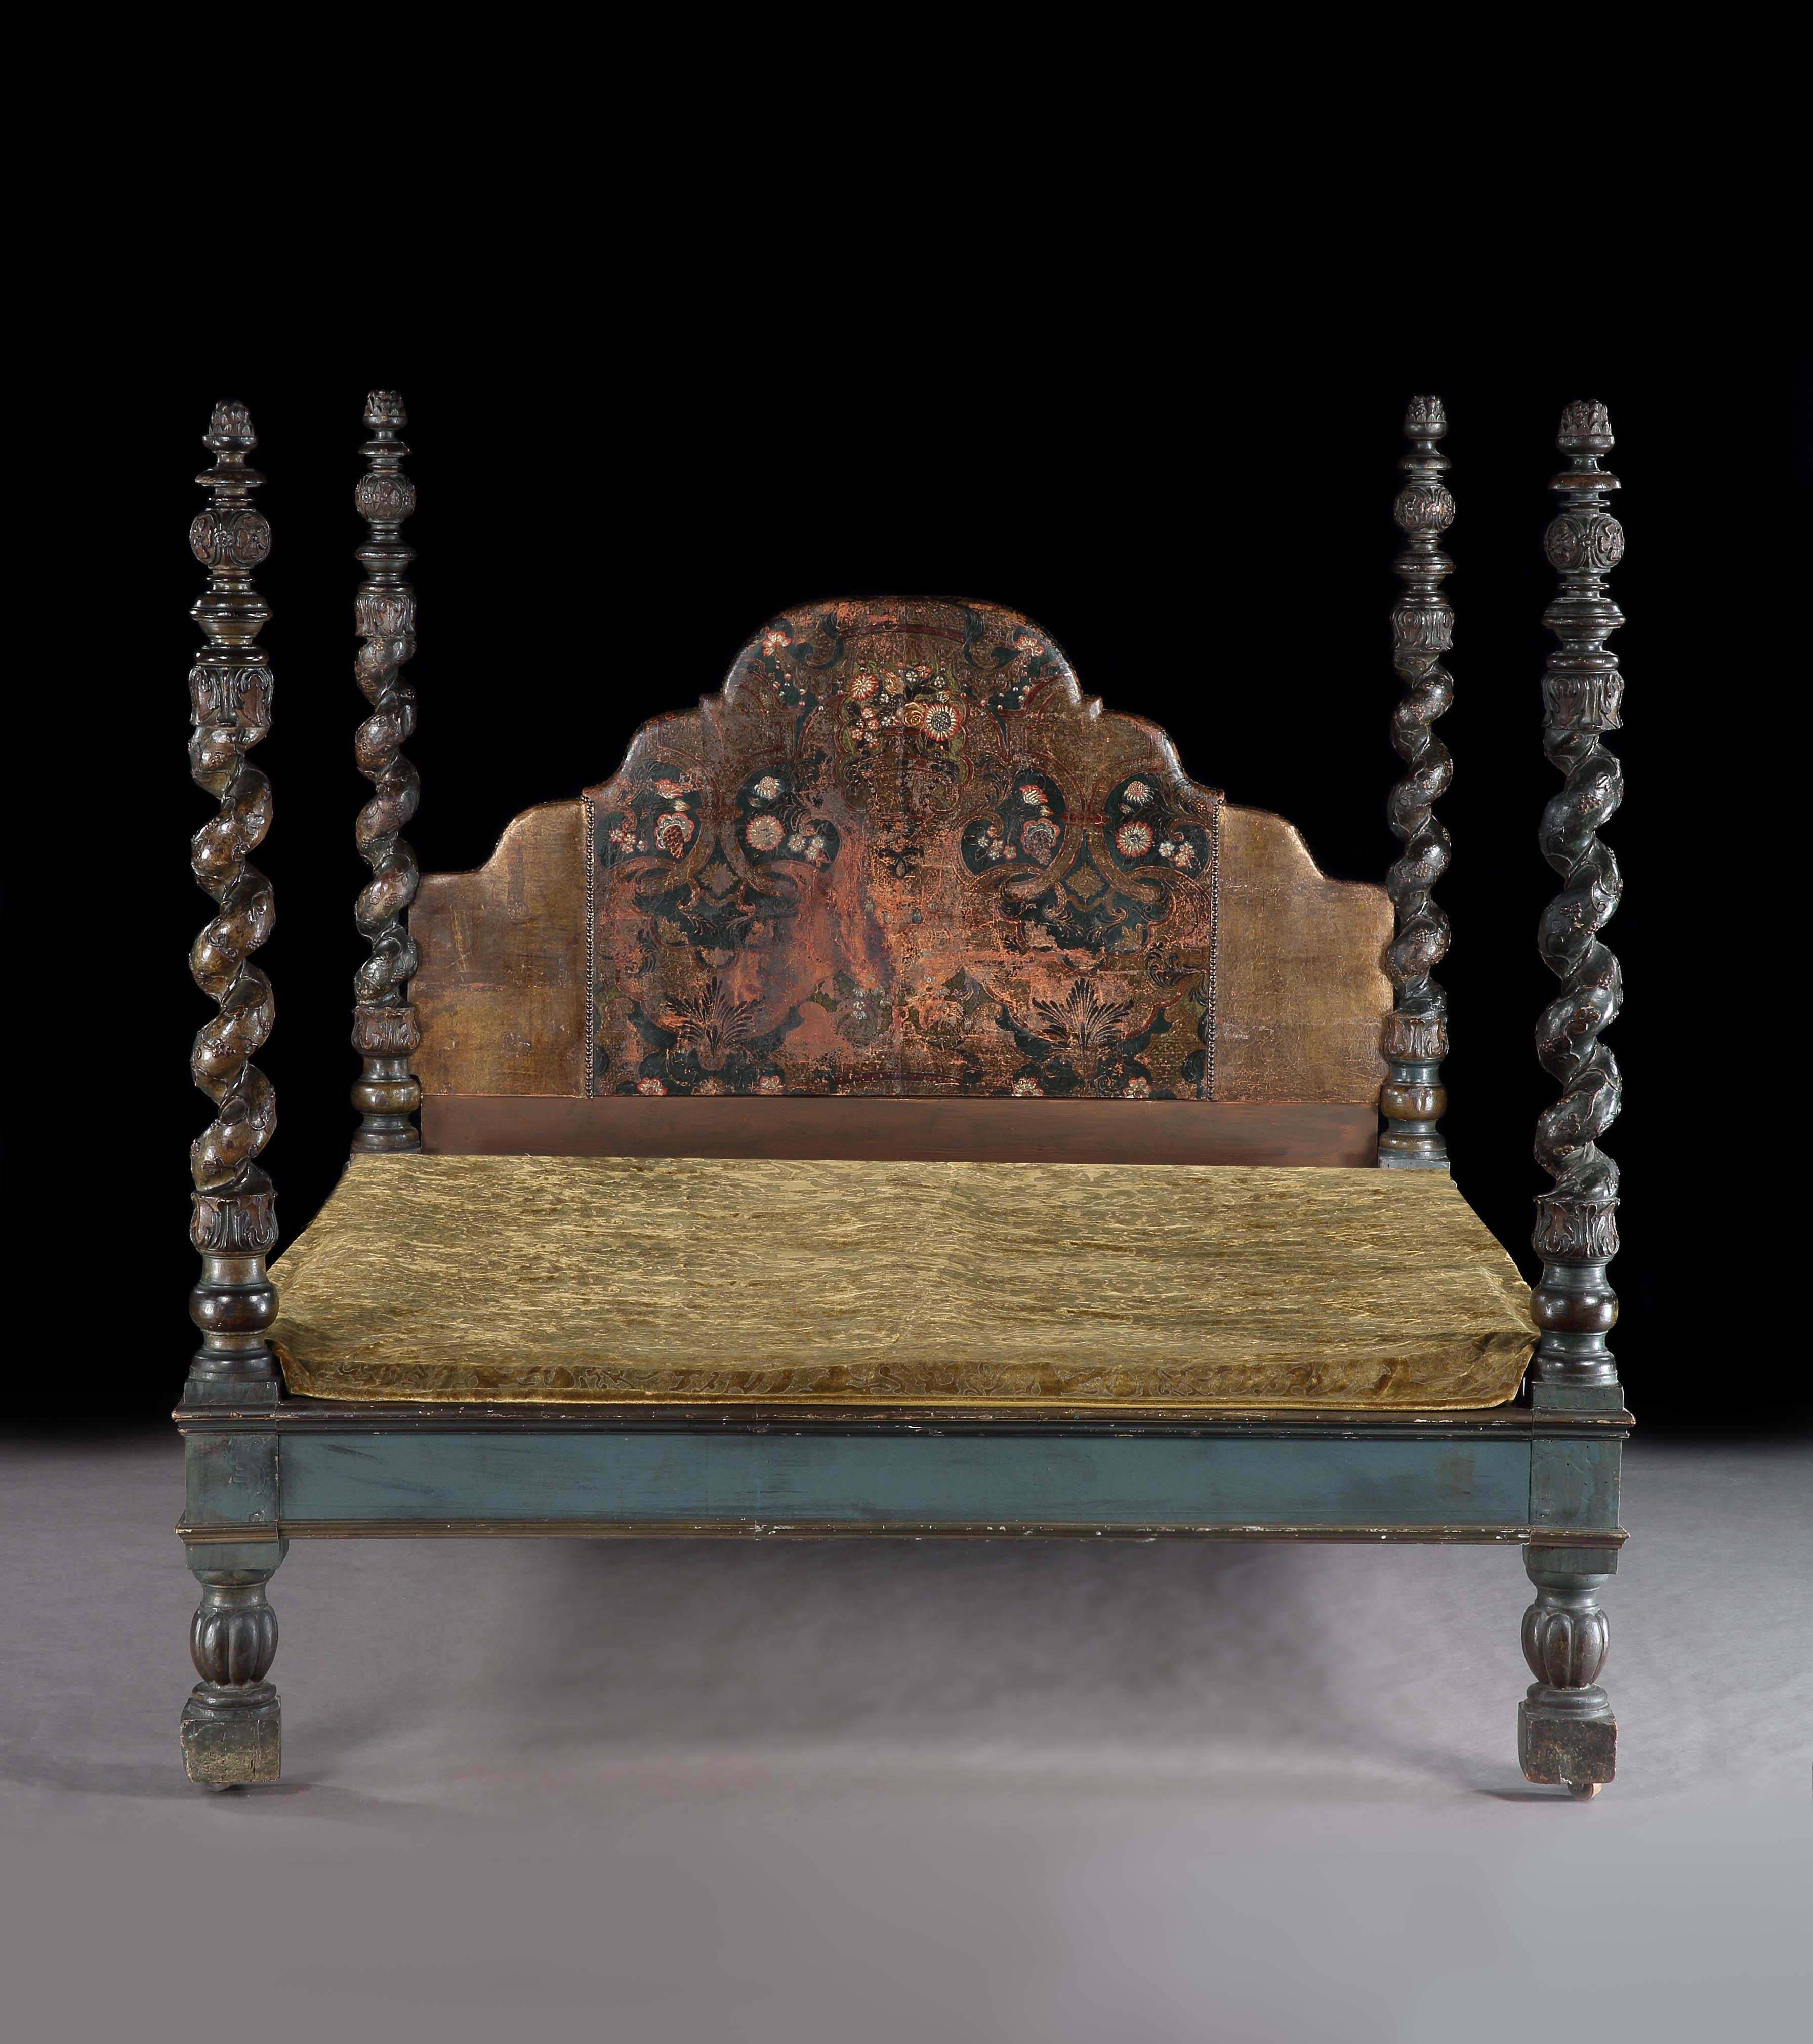 Rare, Spanish Demi-Tester, Baroque Bed With Carved, Green Painted & Gilded Posts 181cm, 6ft High, Floral Painted Leather Headboard, With Gold Velvet & Gilt Embroidered Bedspread, sold with custom made box spring mattress base, accomodates superking